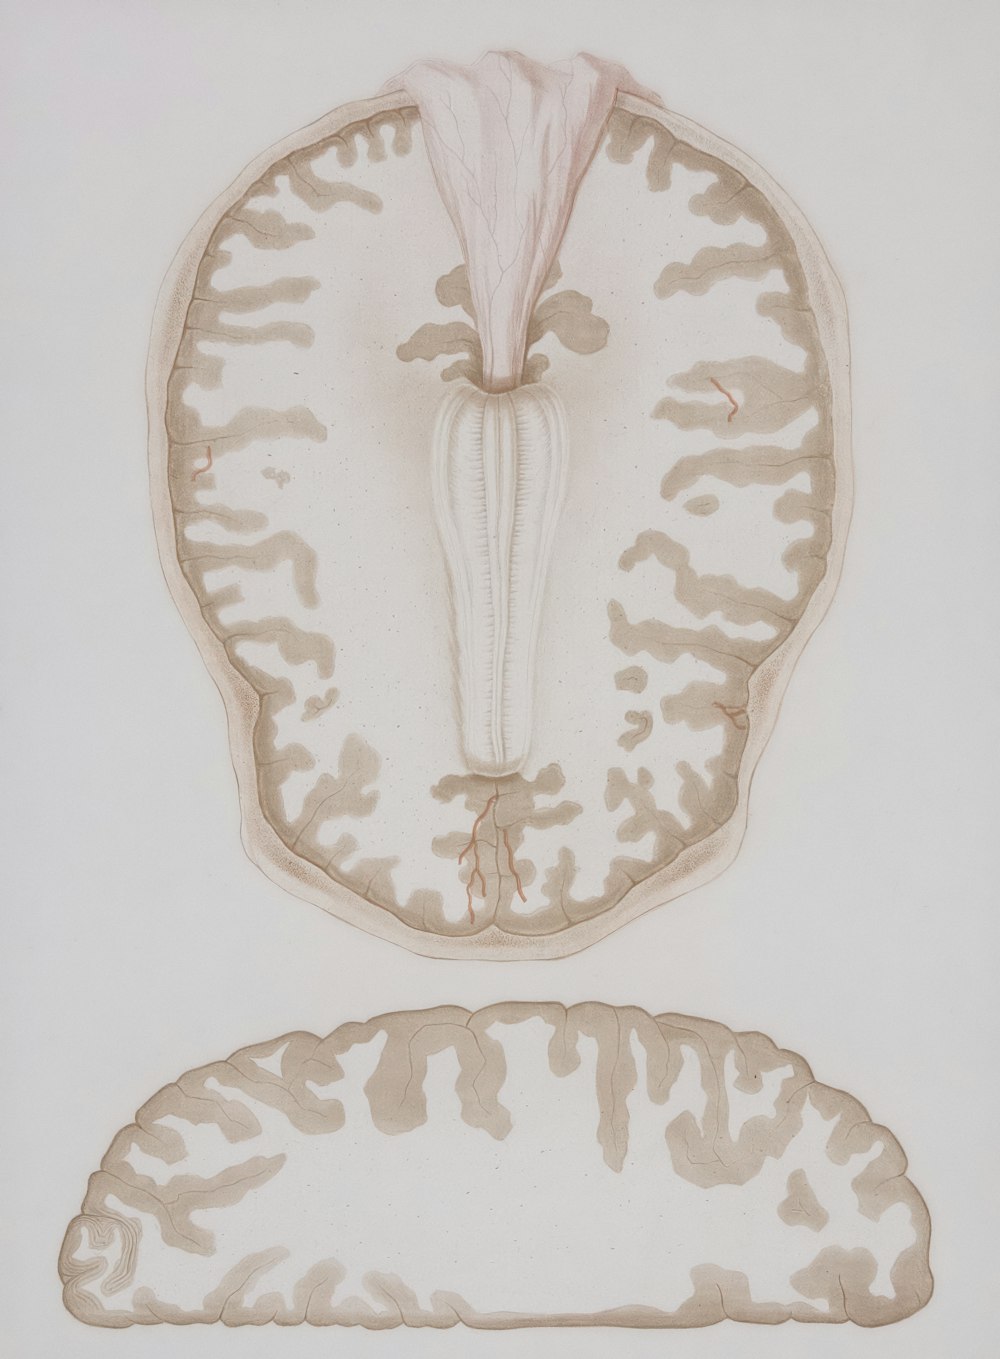 a drawing of a brain and a section of the brain